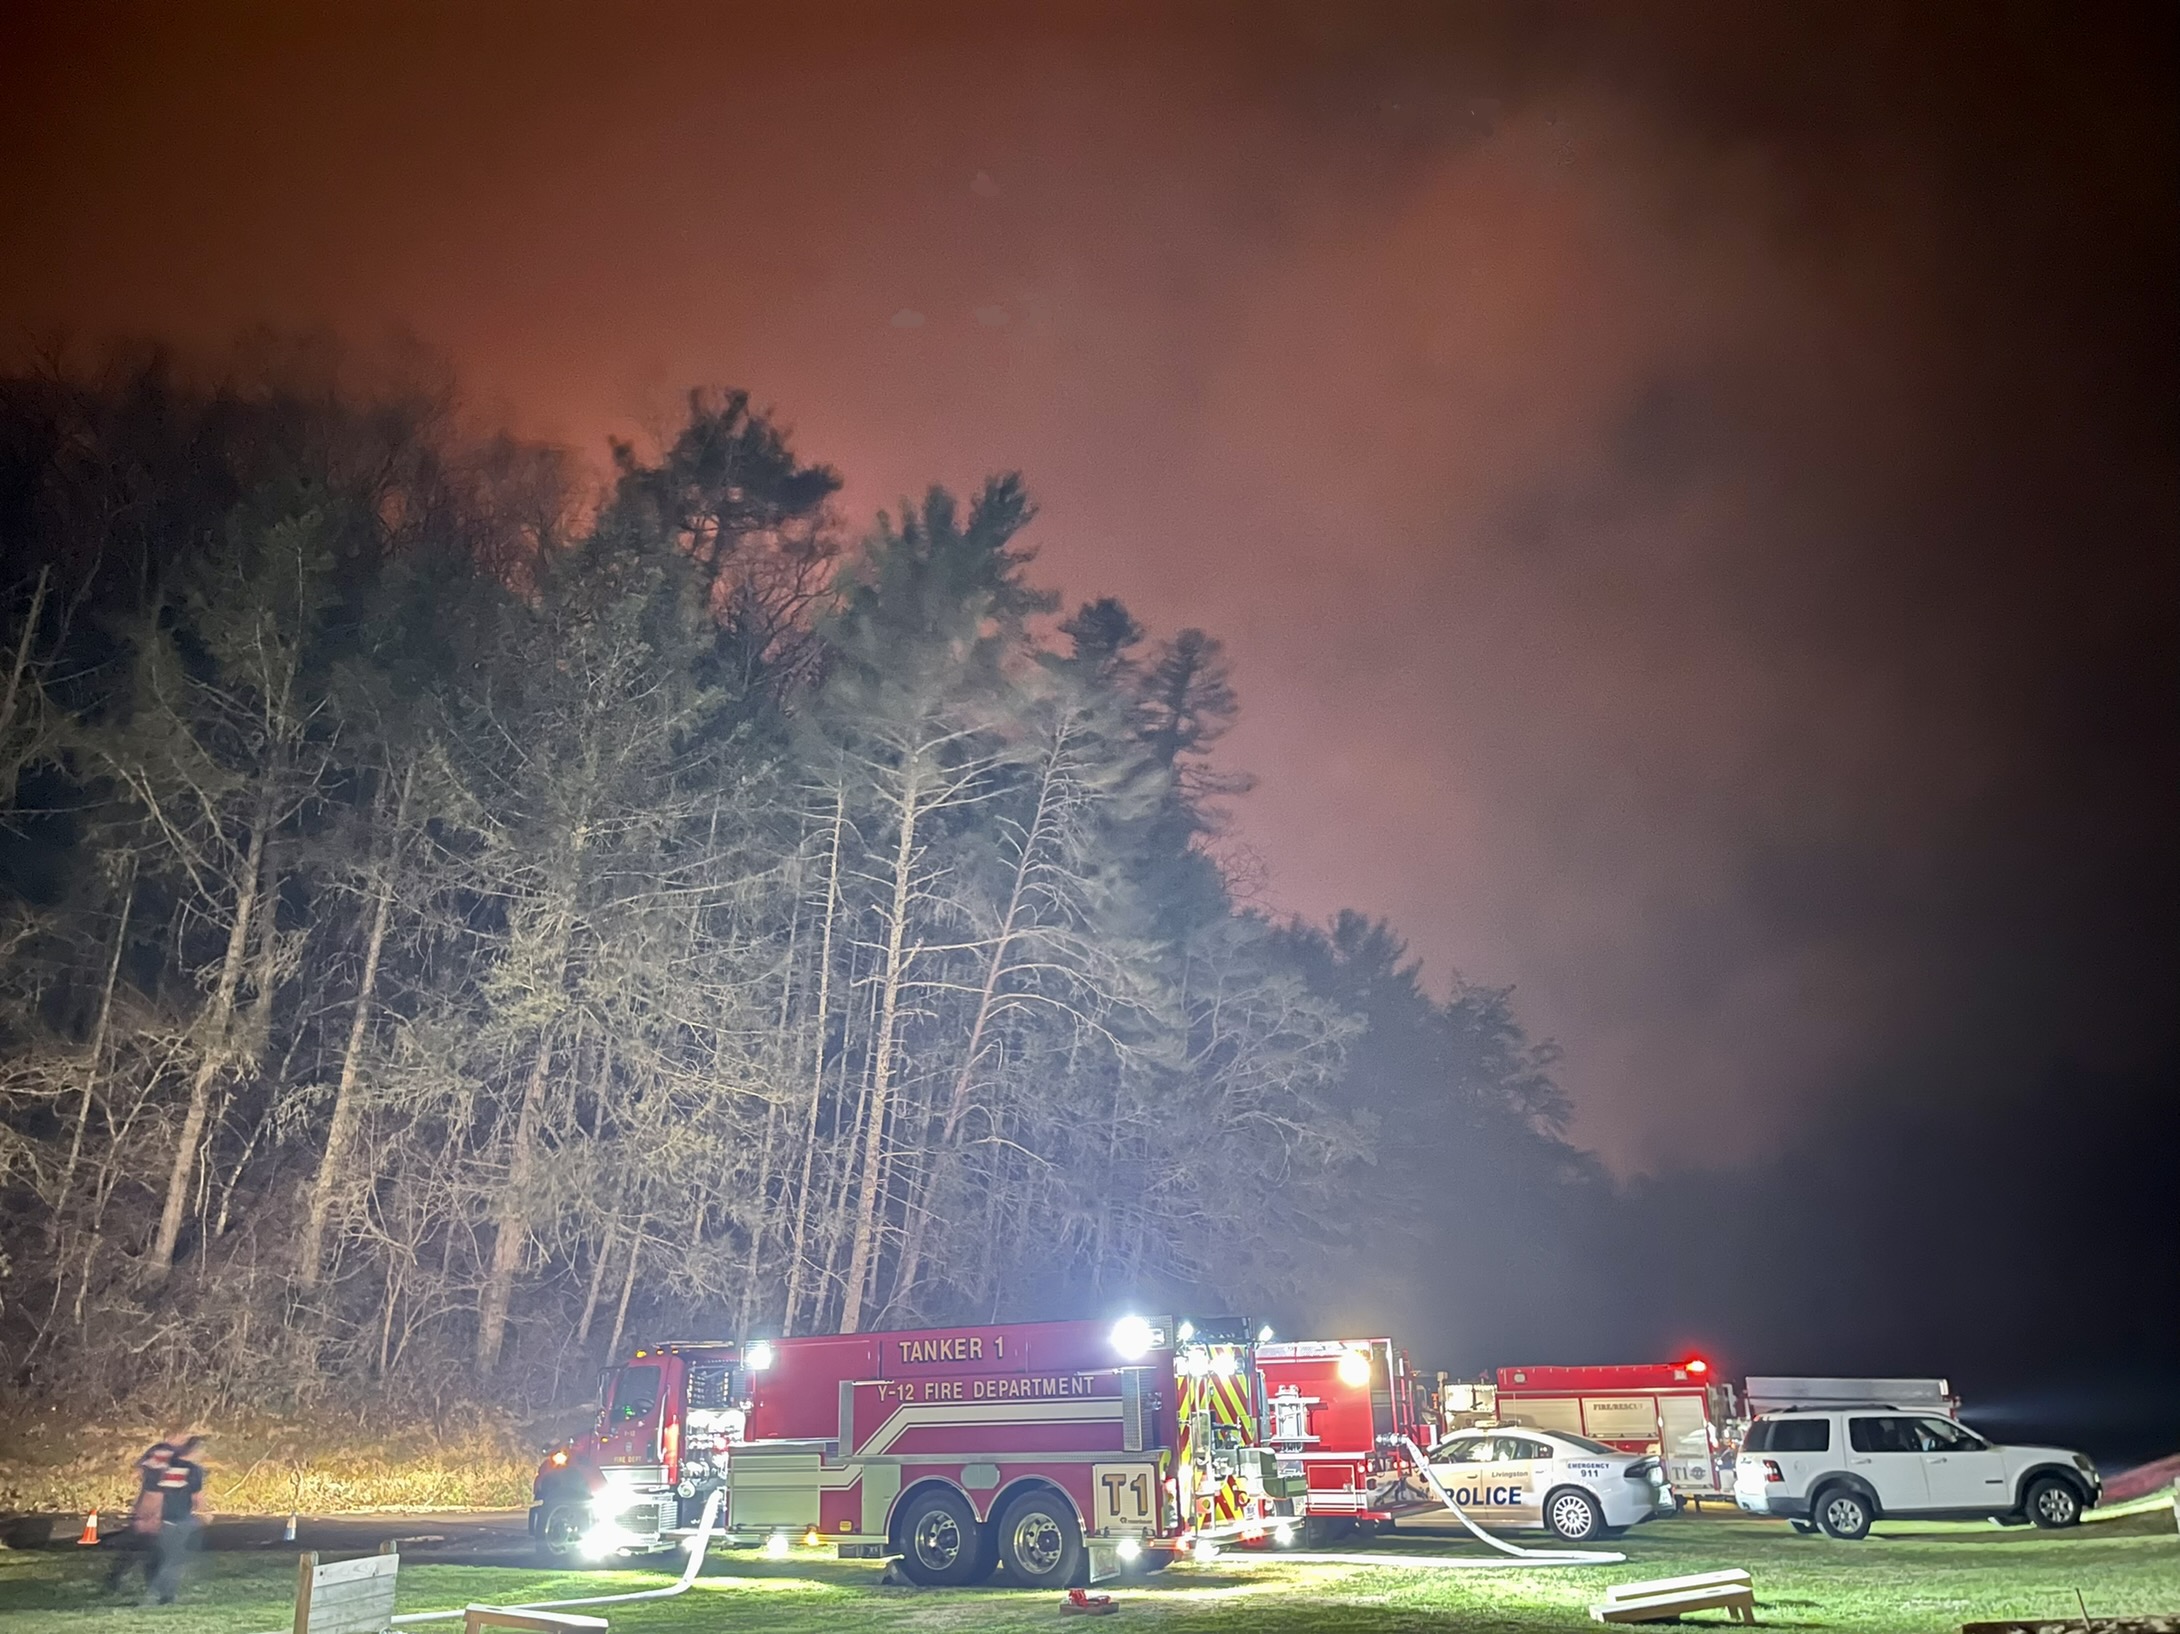 The Y-12 Fire Department sent a tanker to help contain the recent wildfires in Sevier County